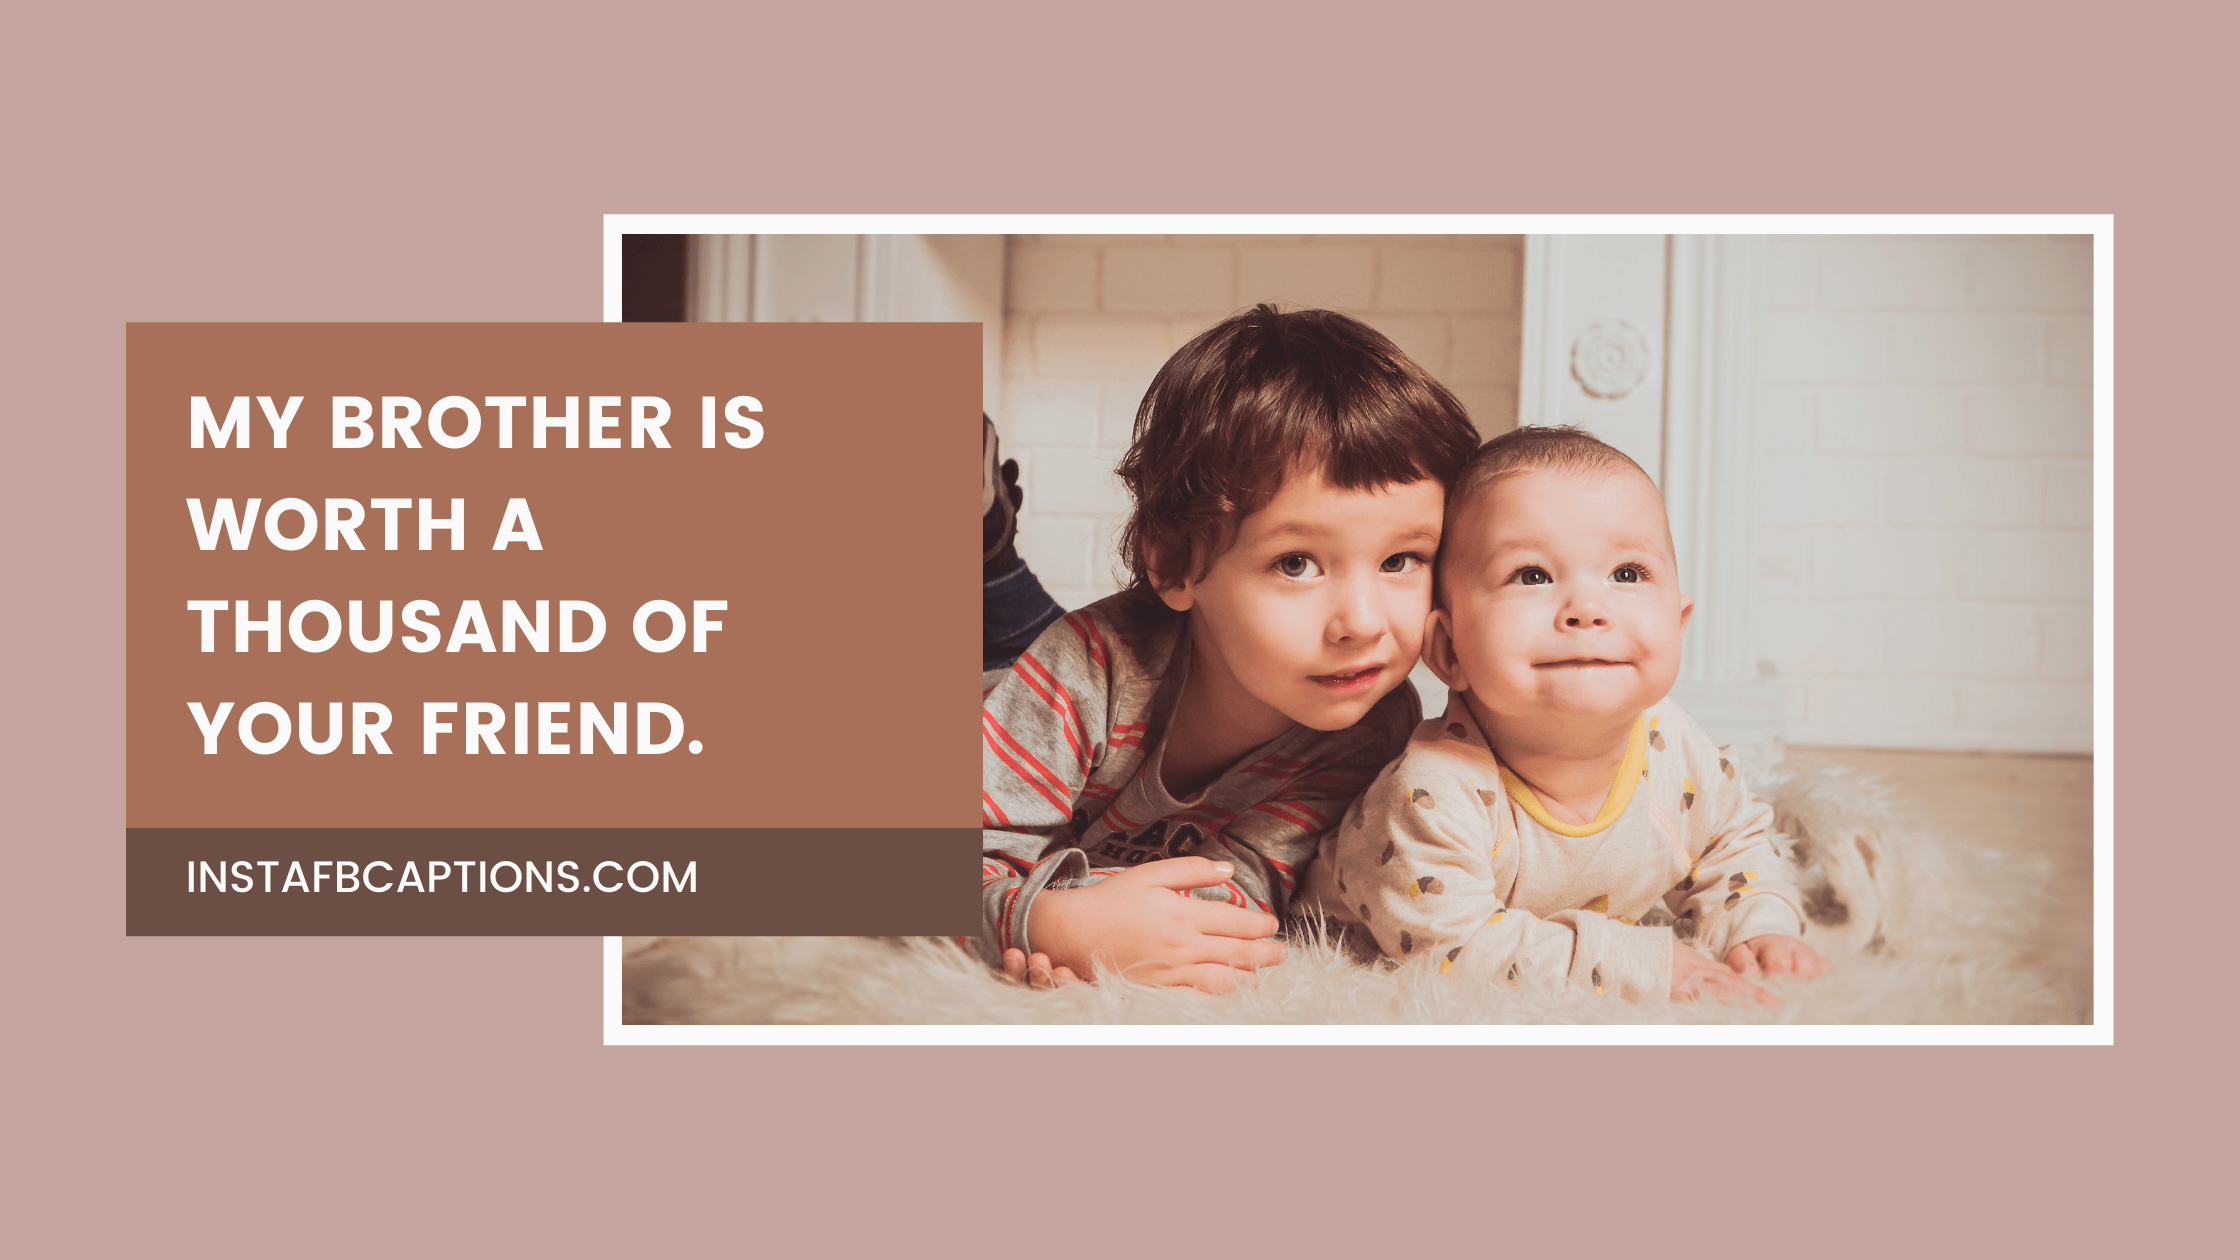 My brother is worth a thousand of your friend. instagram brother quotes - Famous Brother Captions - 250+ Brother Captions And Love Quotes For Instagram 2022